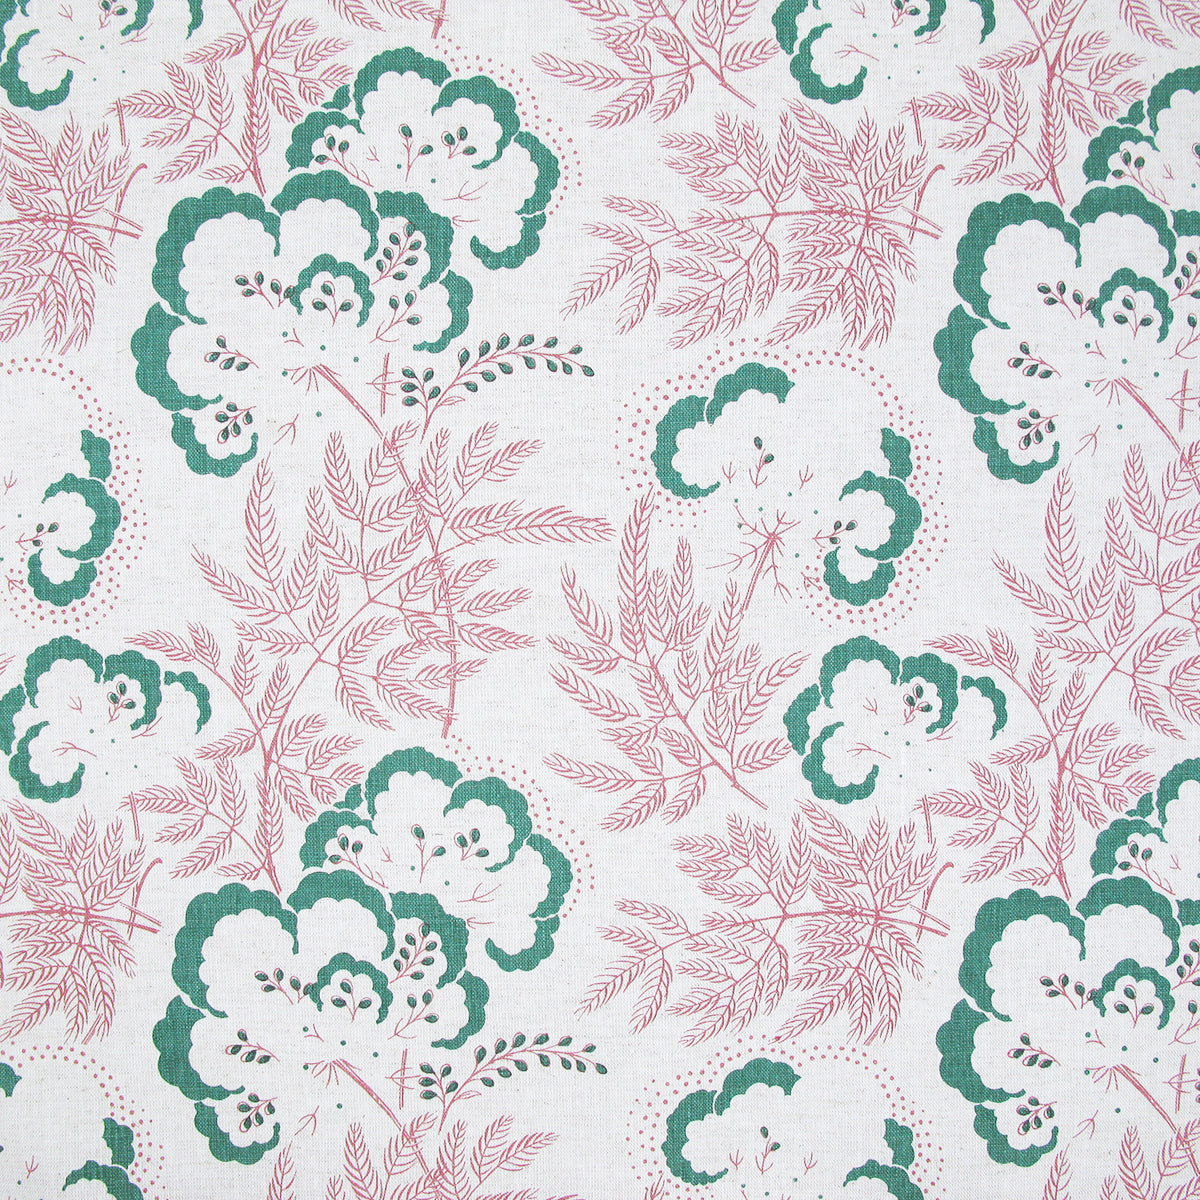 Detail of fabric in an intricate floral print in green and pink on a white field.